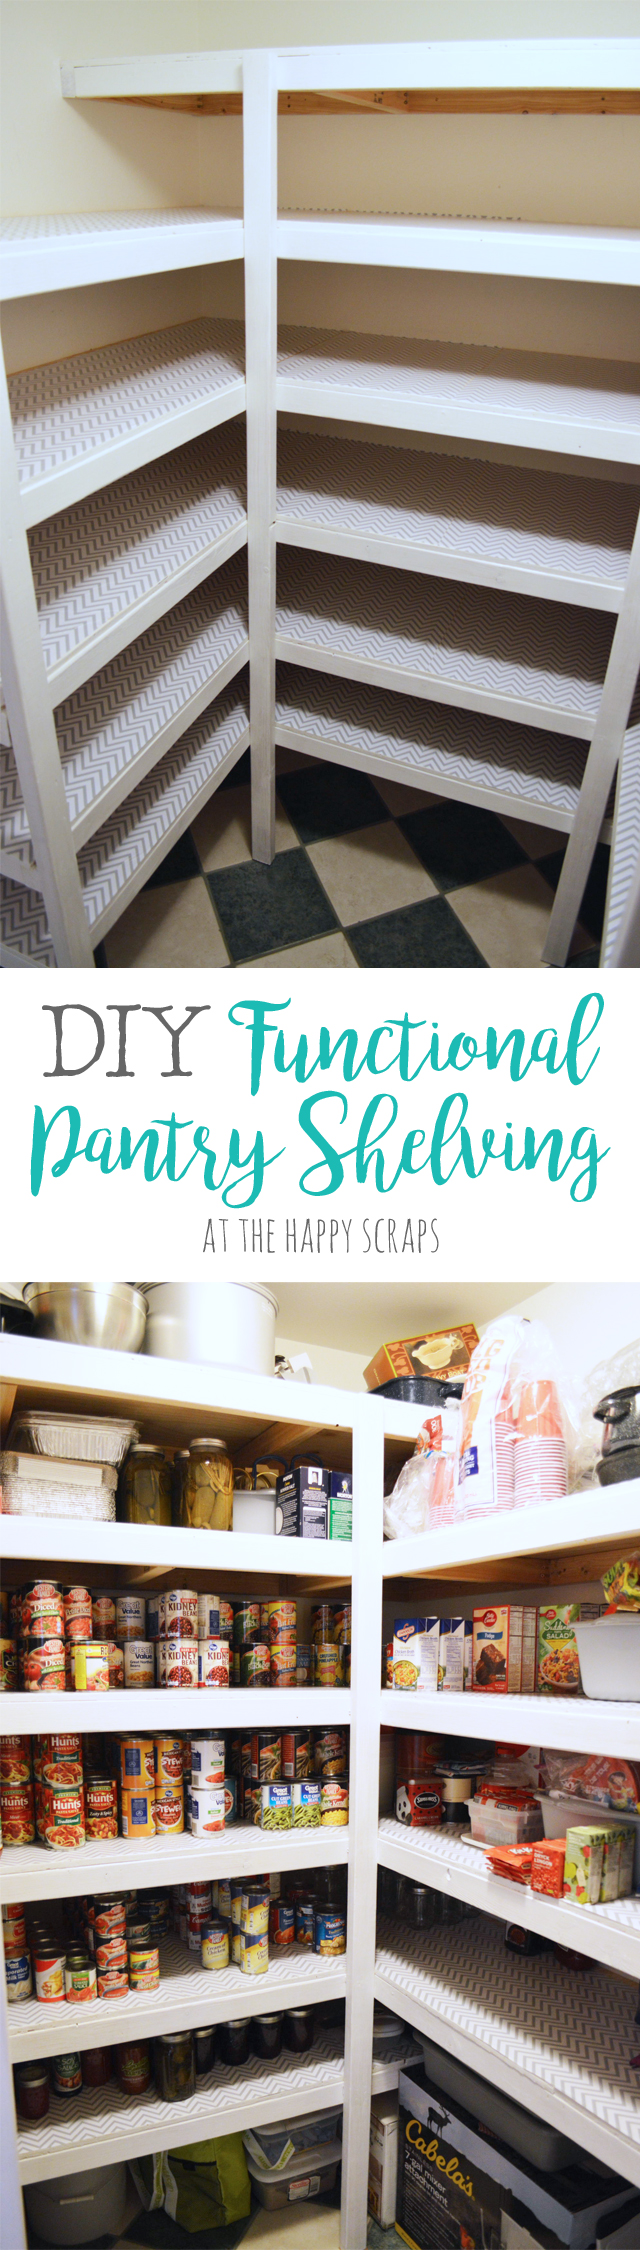 Creative DIY Functional Pantry Shelving with this tutorial from The Happy Scraps. Learn how to use cheaper wood and still get a nice looking pantry.